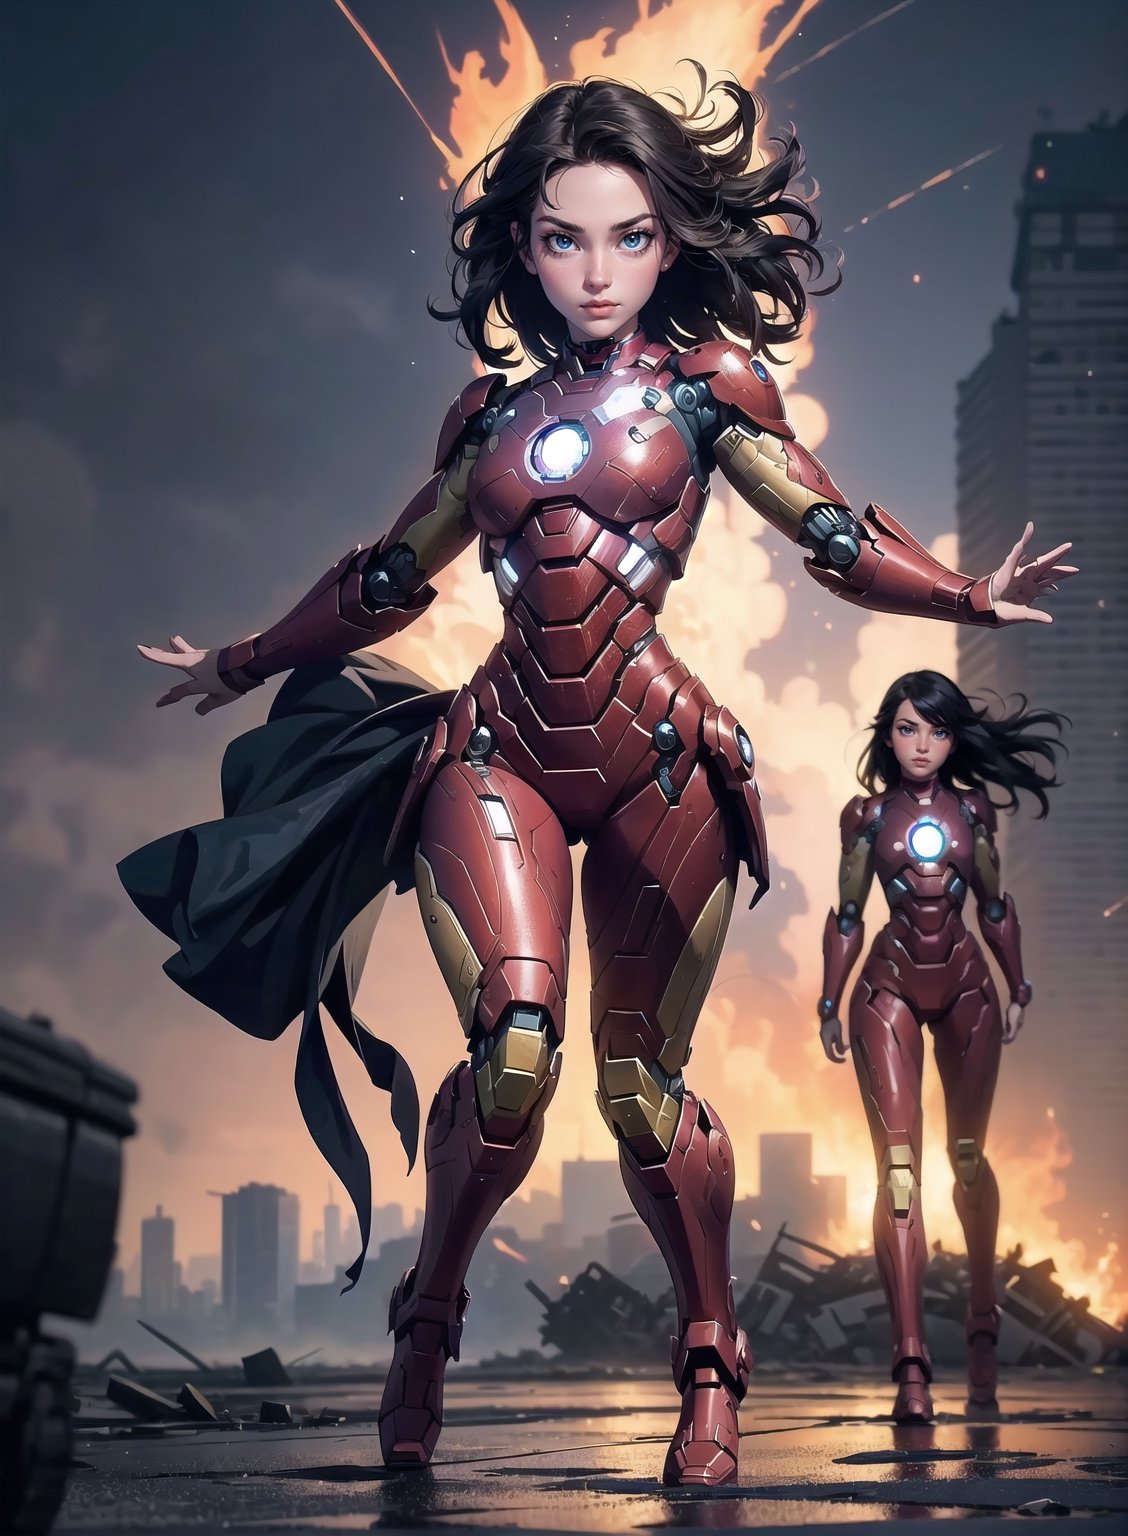 2girls twin sisters, both fighting pose, (masterpiece, top quality, 8K), detailed skin texture, detailed cloth texture, beautiful detailed face, intricate details, ultra Details, both ironman uniform, shine body,swaying middle hair, (full body: 1.1), (shy smile),jet flame bursting out from  both hands, jumping up,shining lighting, destroyed city background, evil robot standing,Detailedface,glitter,AGGA_ST002